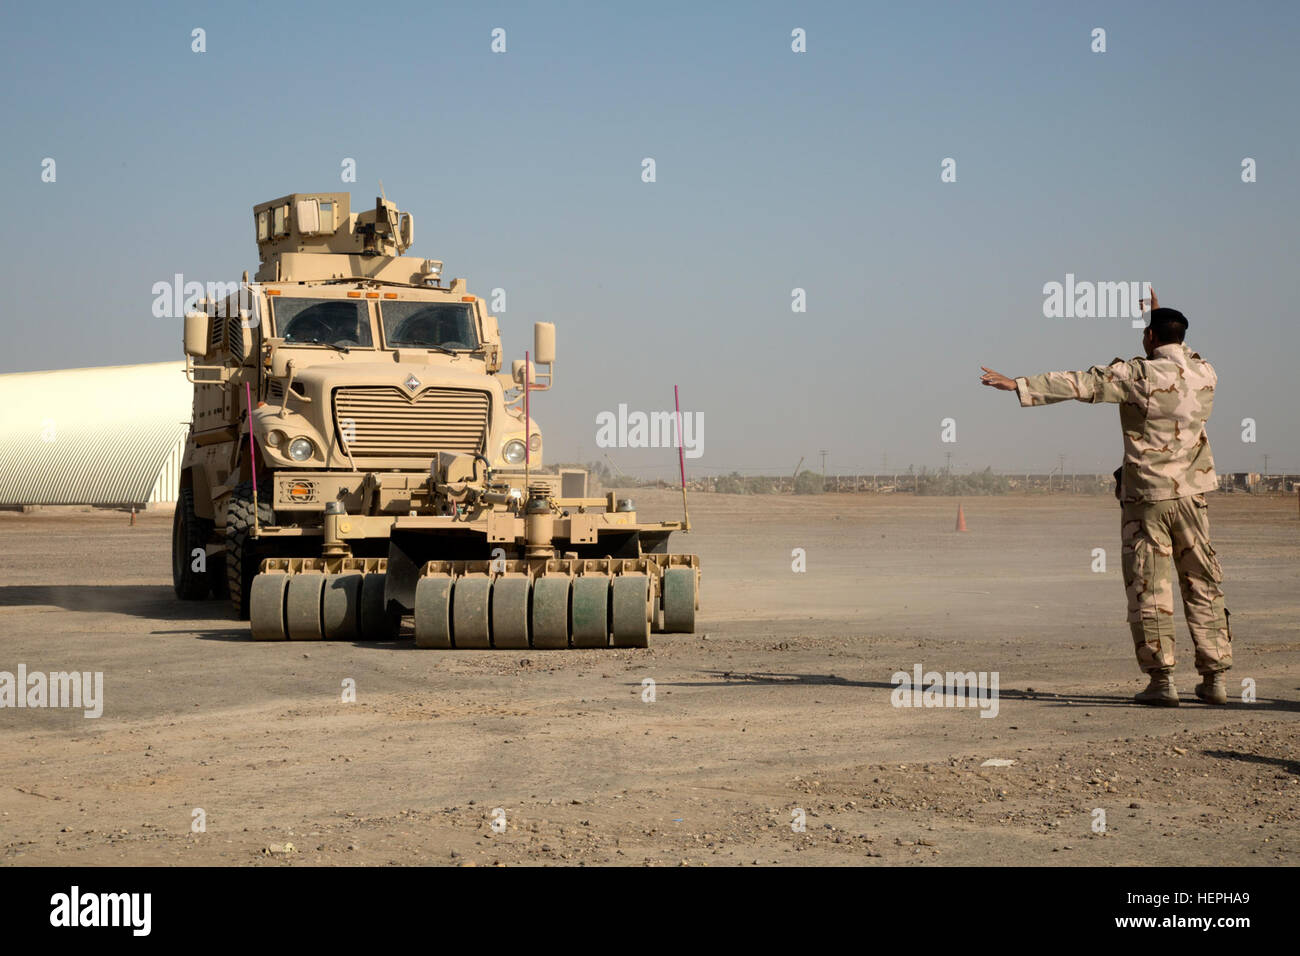 An Iraqi army engineer practices ground-guiding during mine-resistant, ambush-protected vehicle training at Camp Taji, Iraq, July 12, 2015. Through advise and assist and build partner capacity missions, the Combined Joint Task Force – Operation Inherent Resolve’s multinational coalition has trained more than 10,000 Iraqi security force personnel to defeat the Islamic State of Iraq and the Levant. (U.S. Army photo by Spc. Paris Maxey/Released) Iraqi Army Soldiers train on mine sweeping and vehicle maintenance 150712-A-XM842-052 Stock Photo